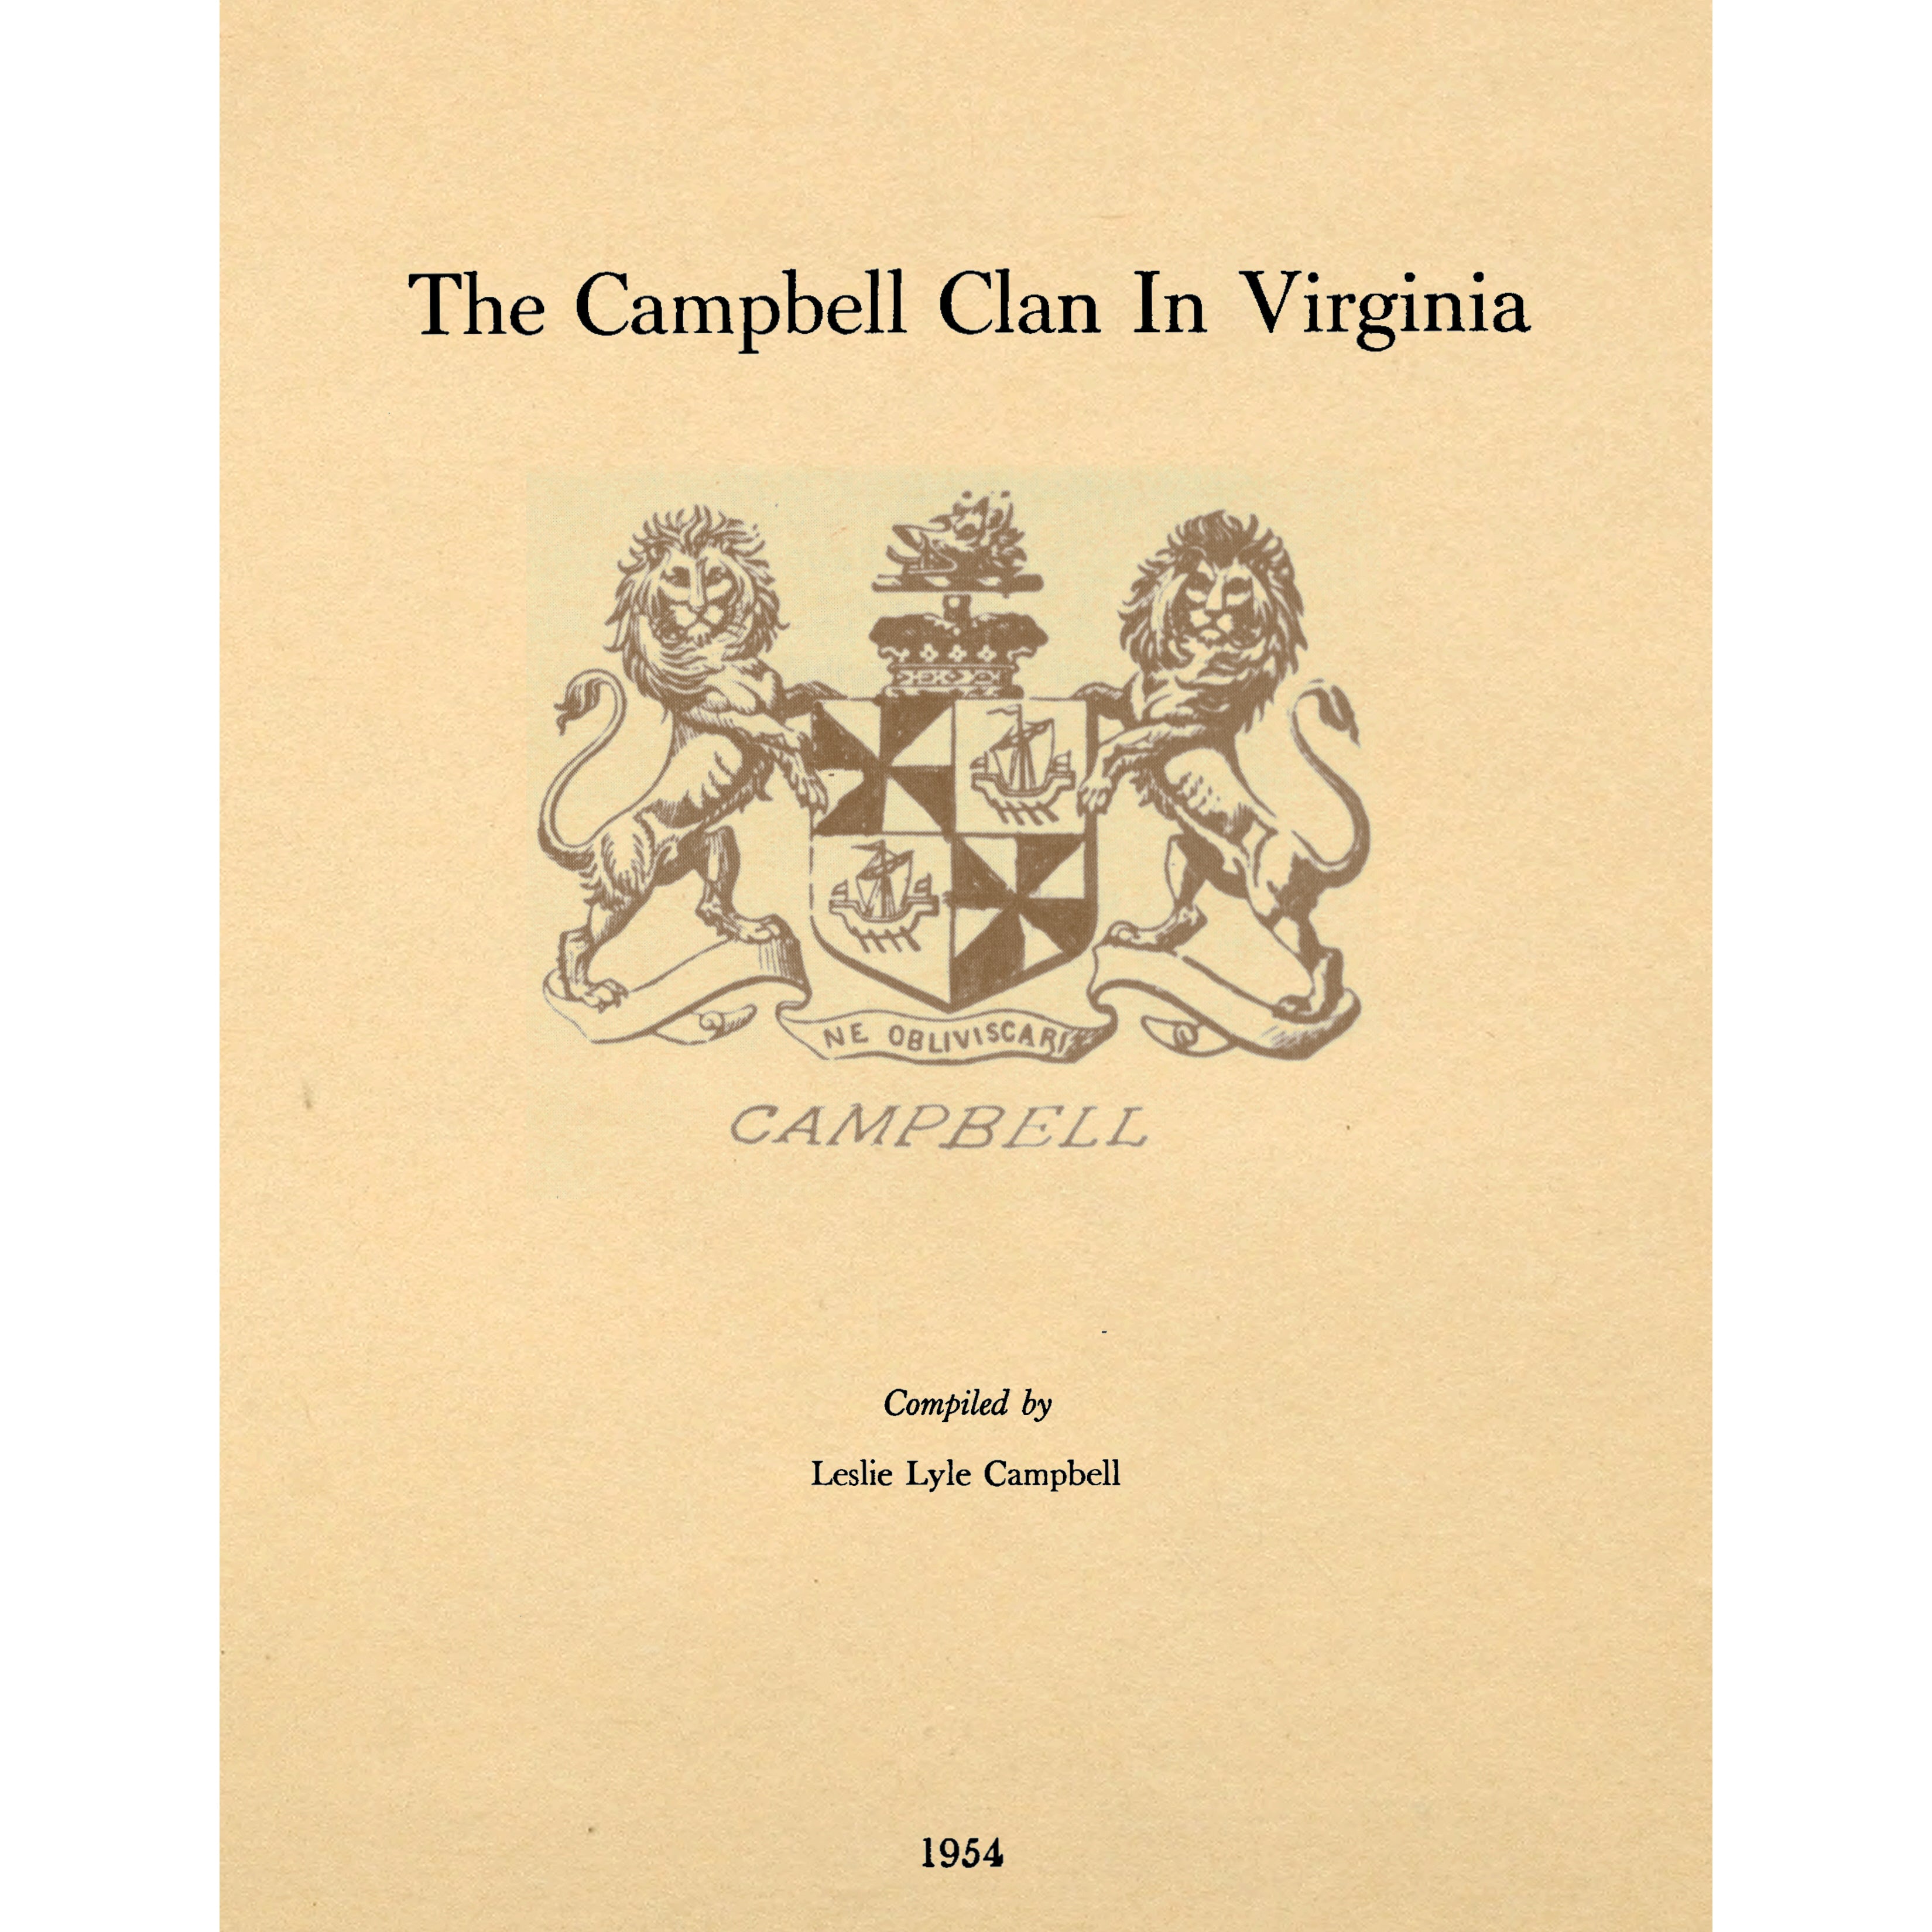 The Campbell Clan in Virginia